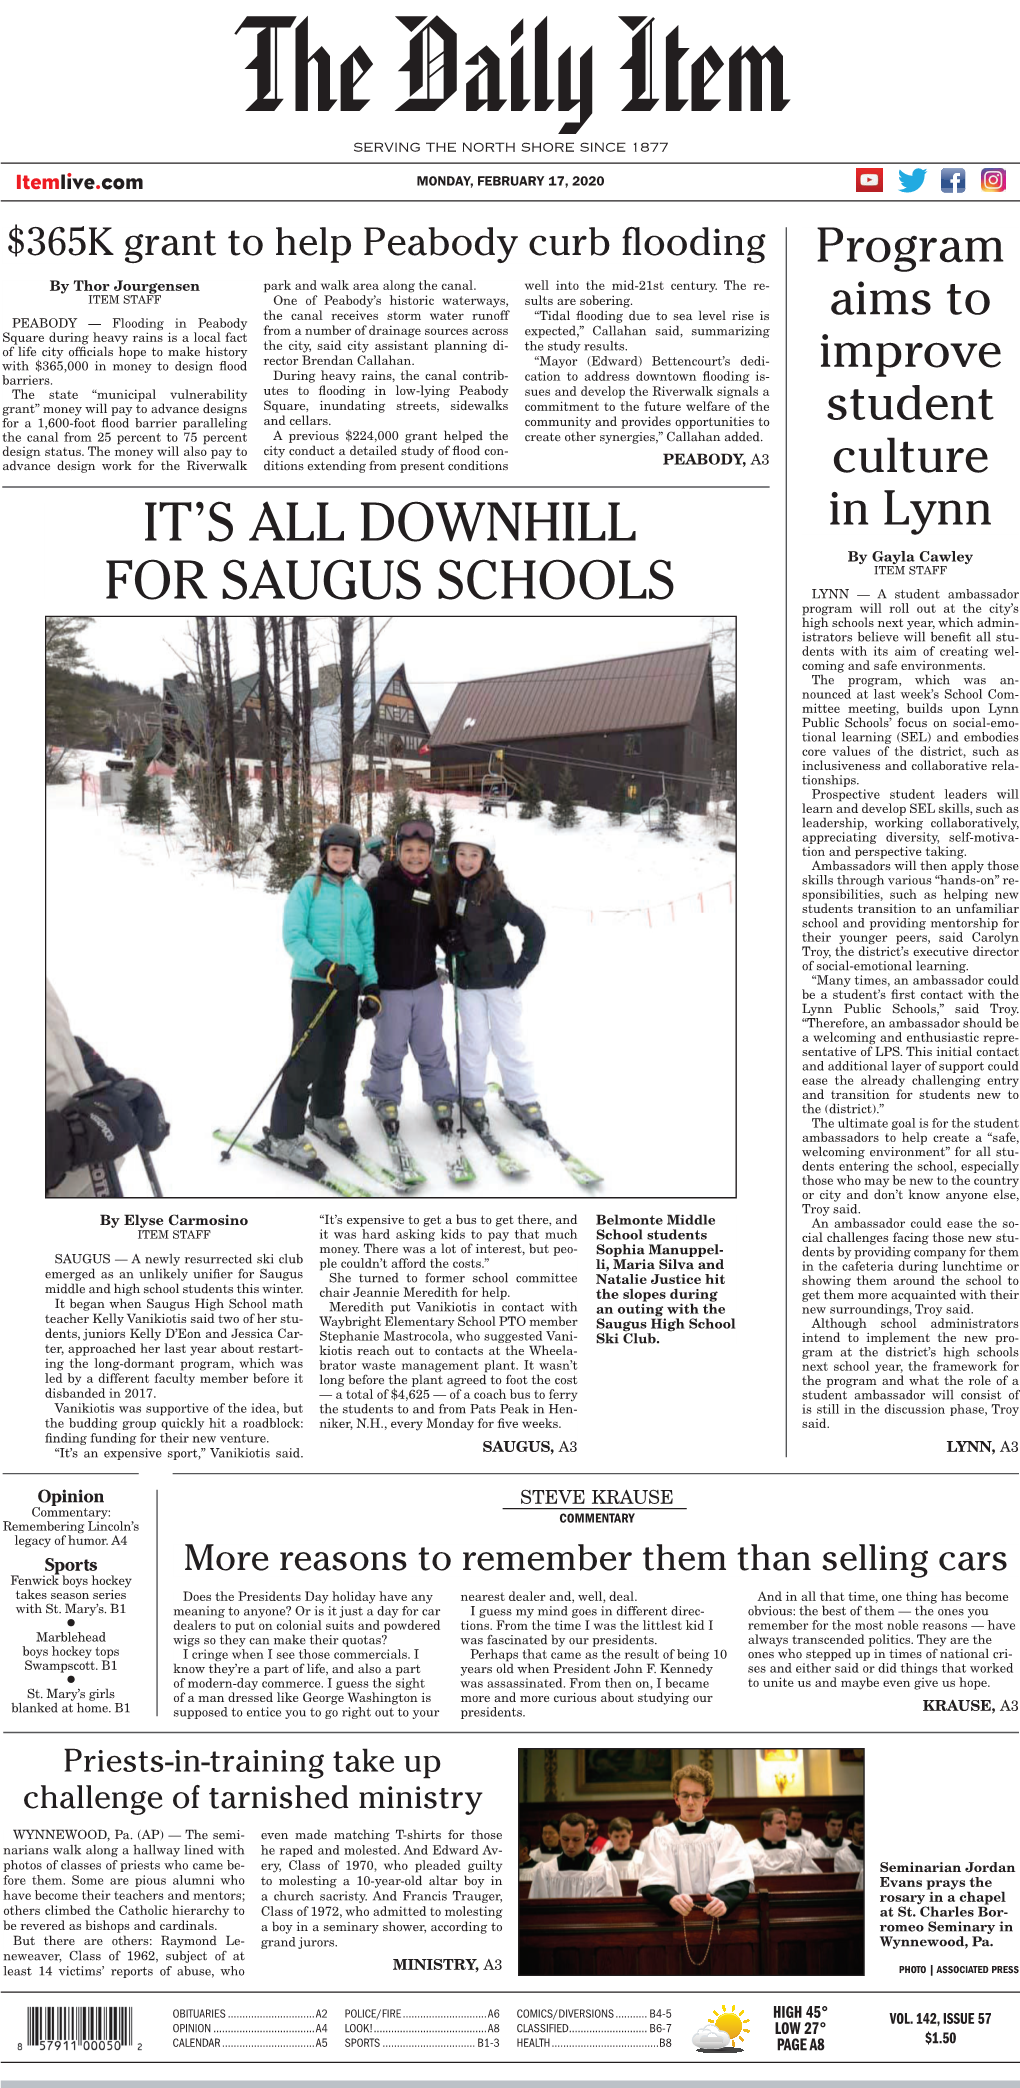 It's All Downhill for Saugus Schools